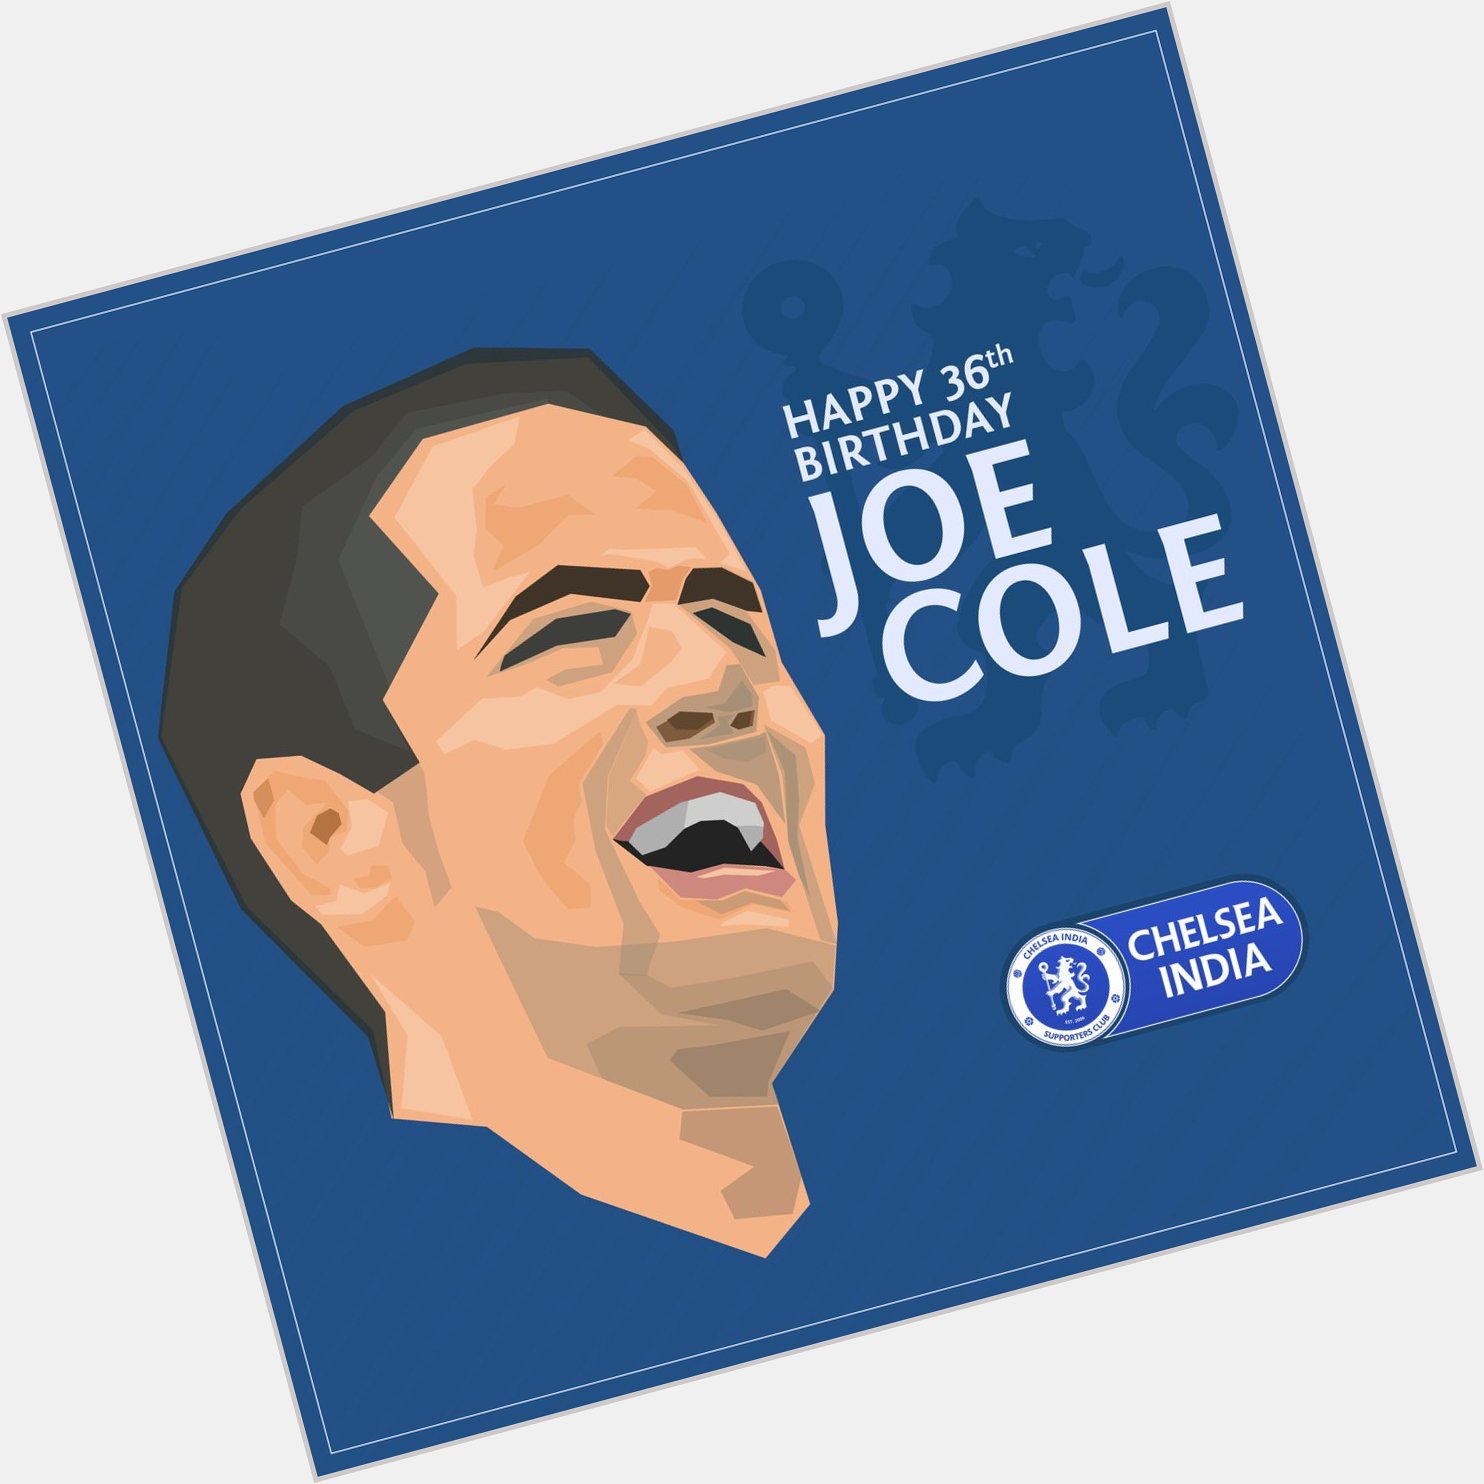 Chelsea India wishes a very Happy Birthday to the man who has won everything in England, Joe Cole! 